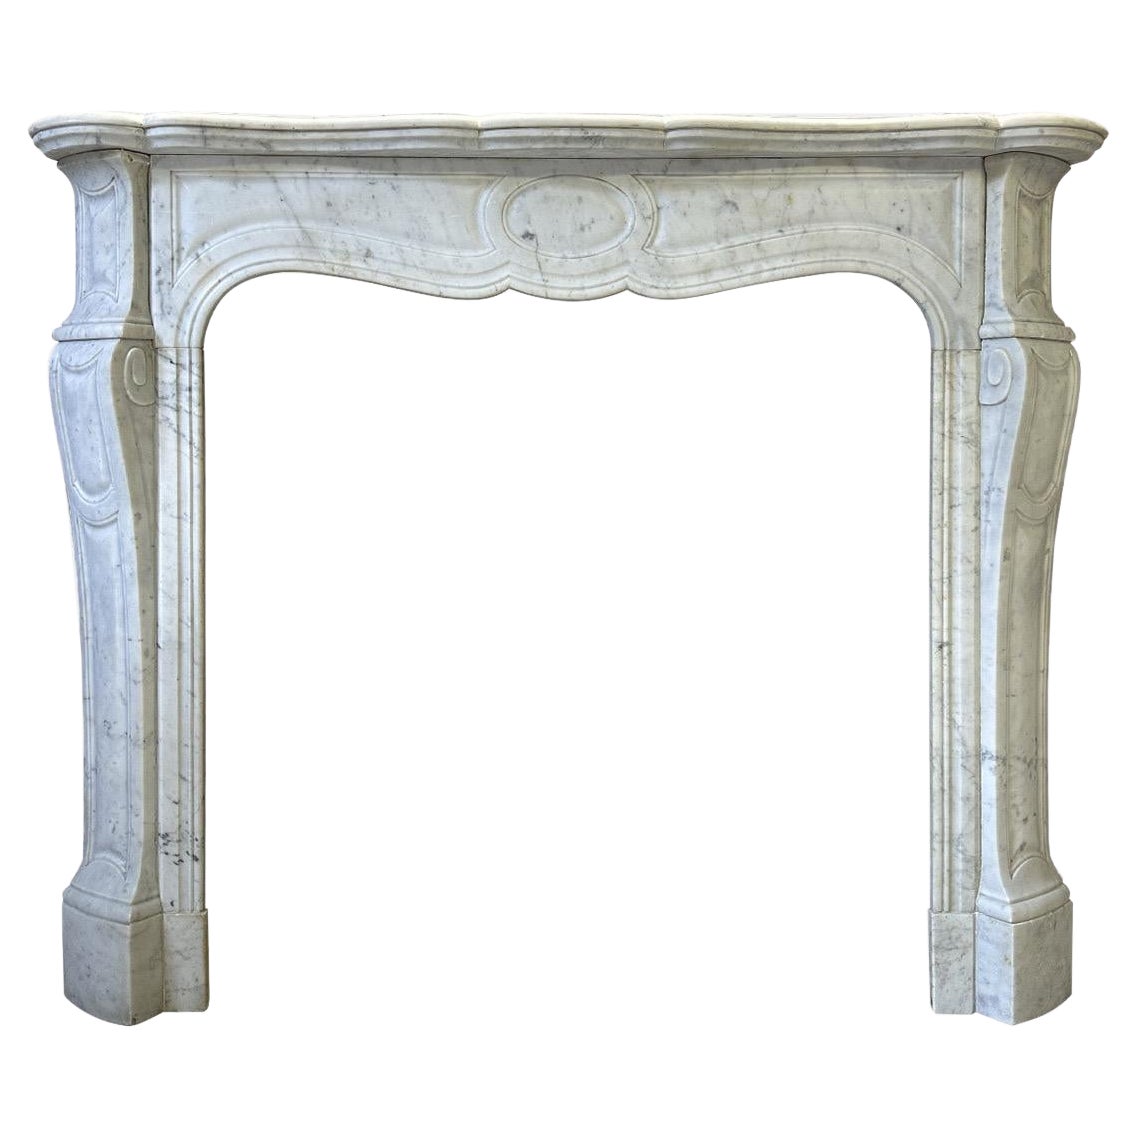 An Antique French Louis XV Pompadour Marble Fireplace Mantel For Sale